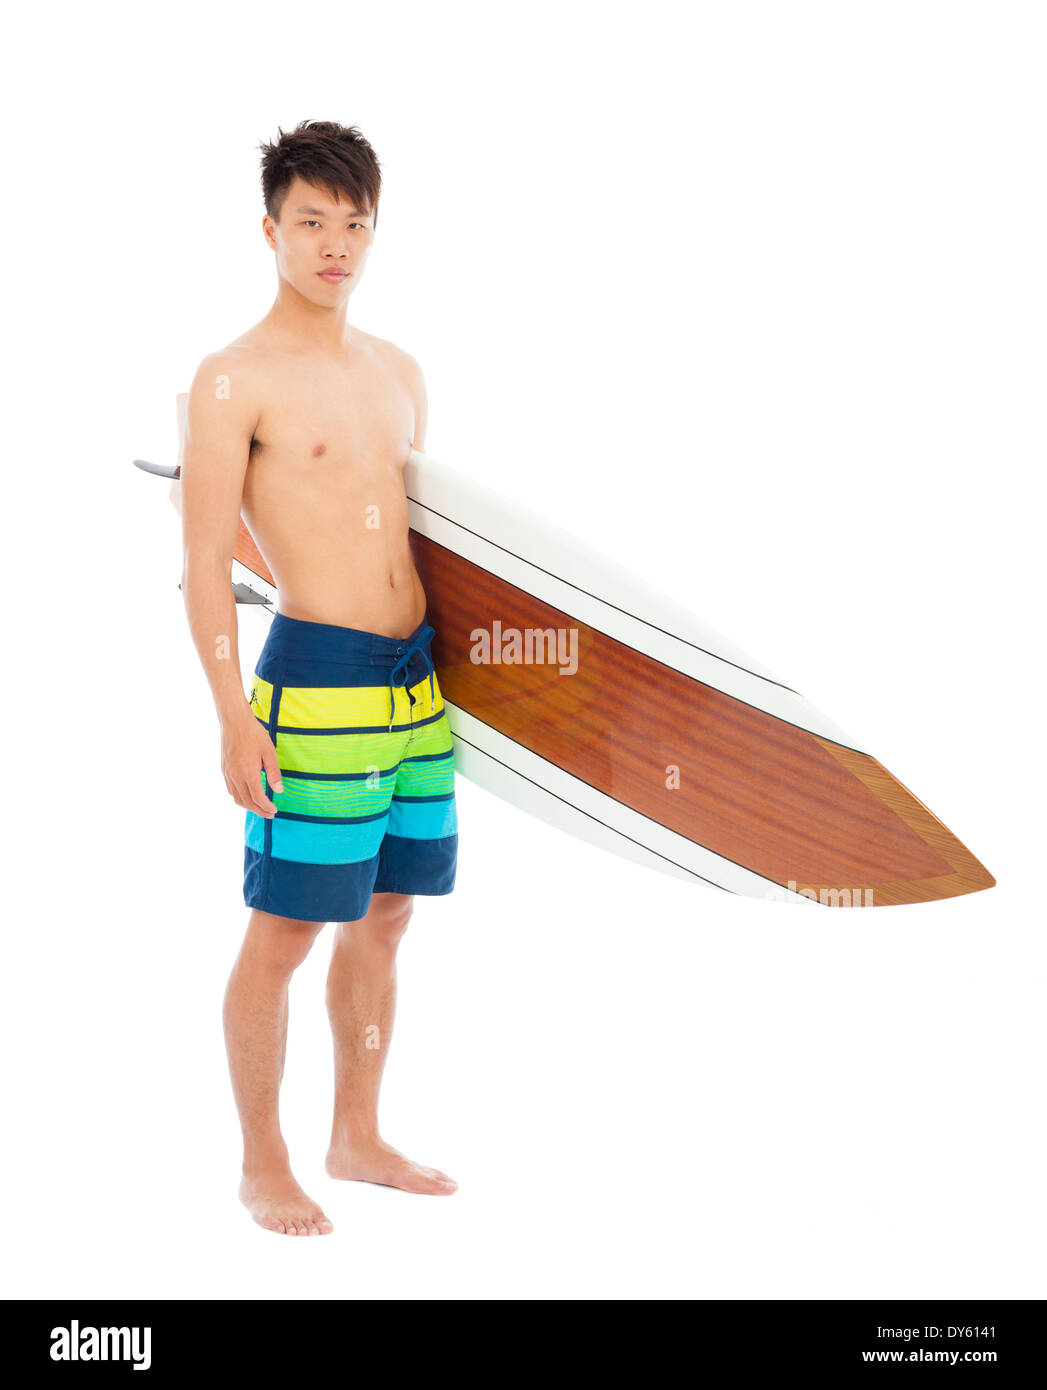 young boy holding a surfboard over white background Stock Photo